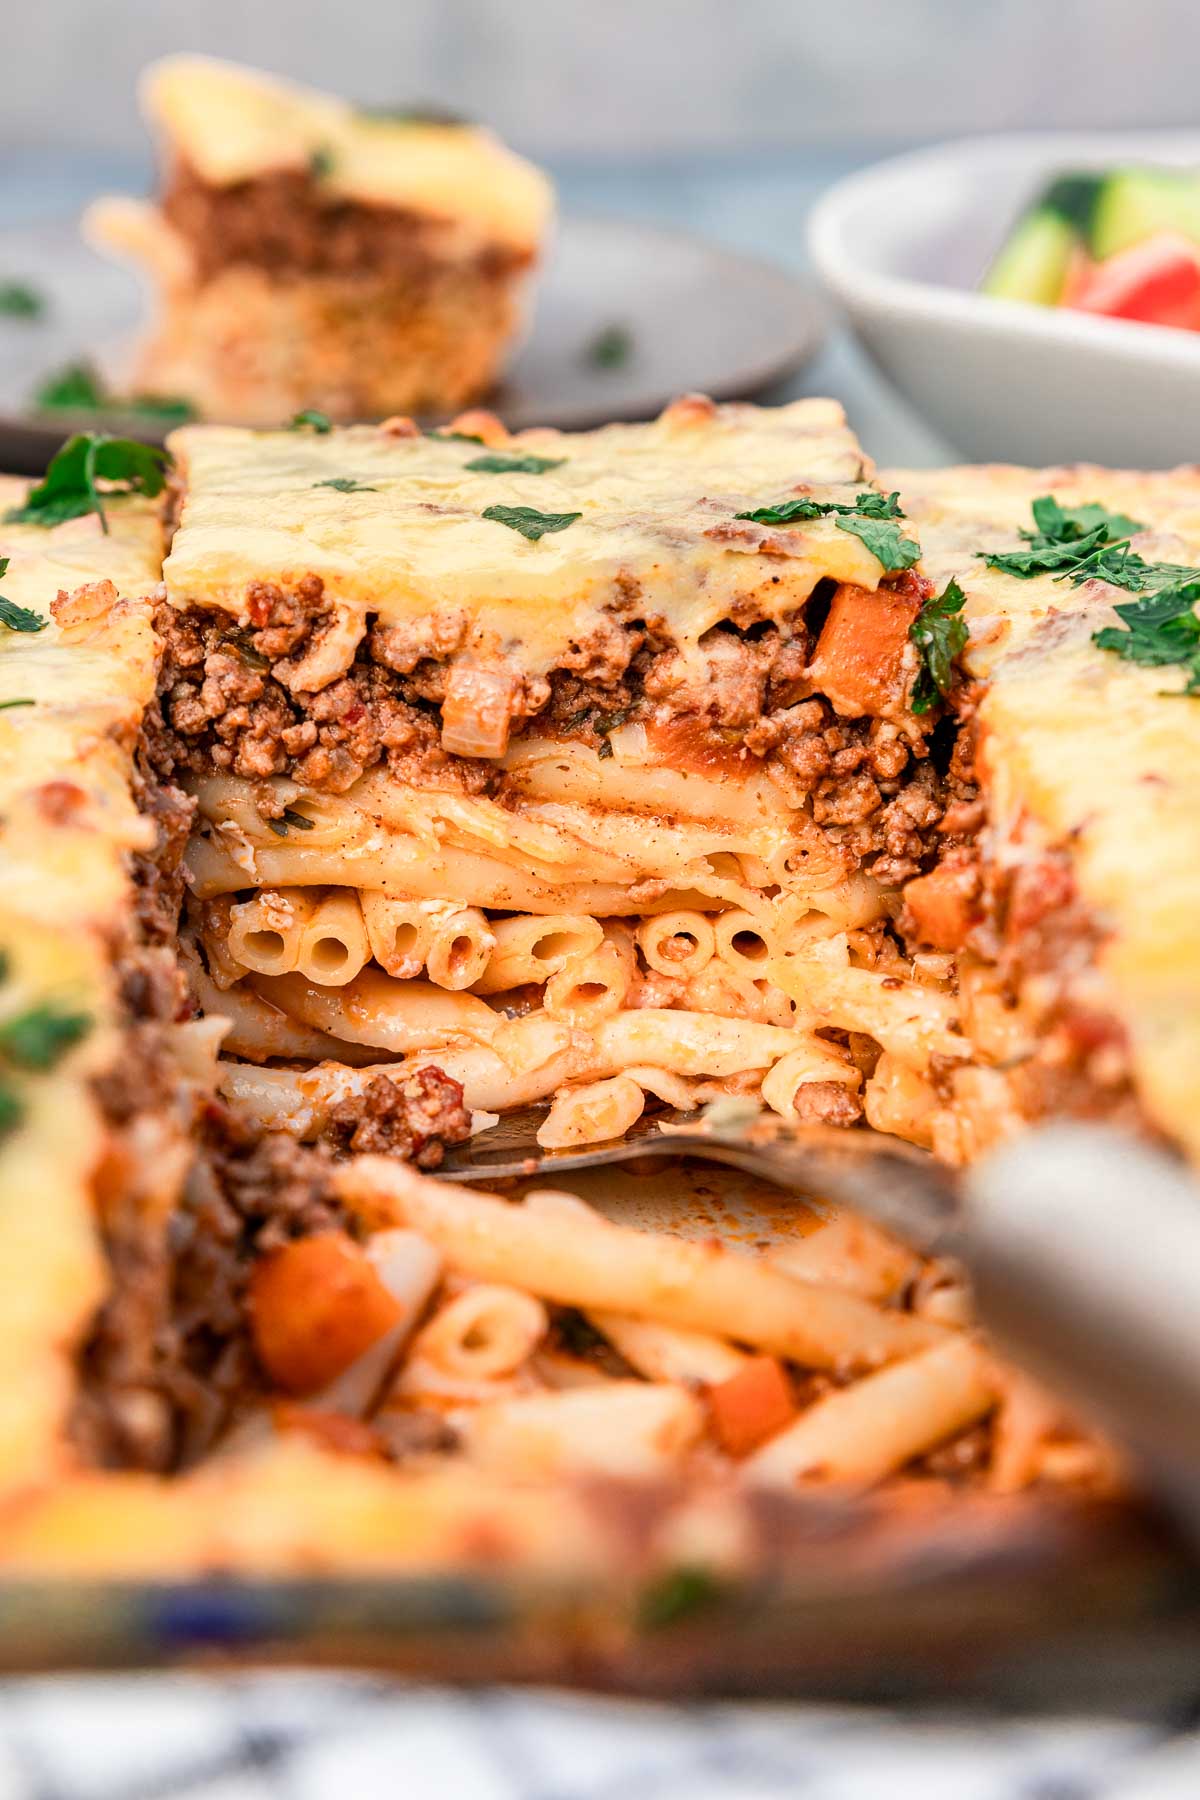 Someone lifting out a square of Greek pastitsio with 3 layers - tube pasta, beef ragu sauce and bechamel sauce, from a large baking dish with a Greek salad and a plate of pastitsio just visible in the background.